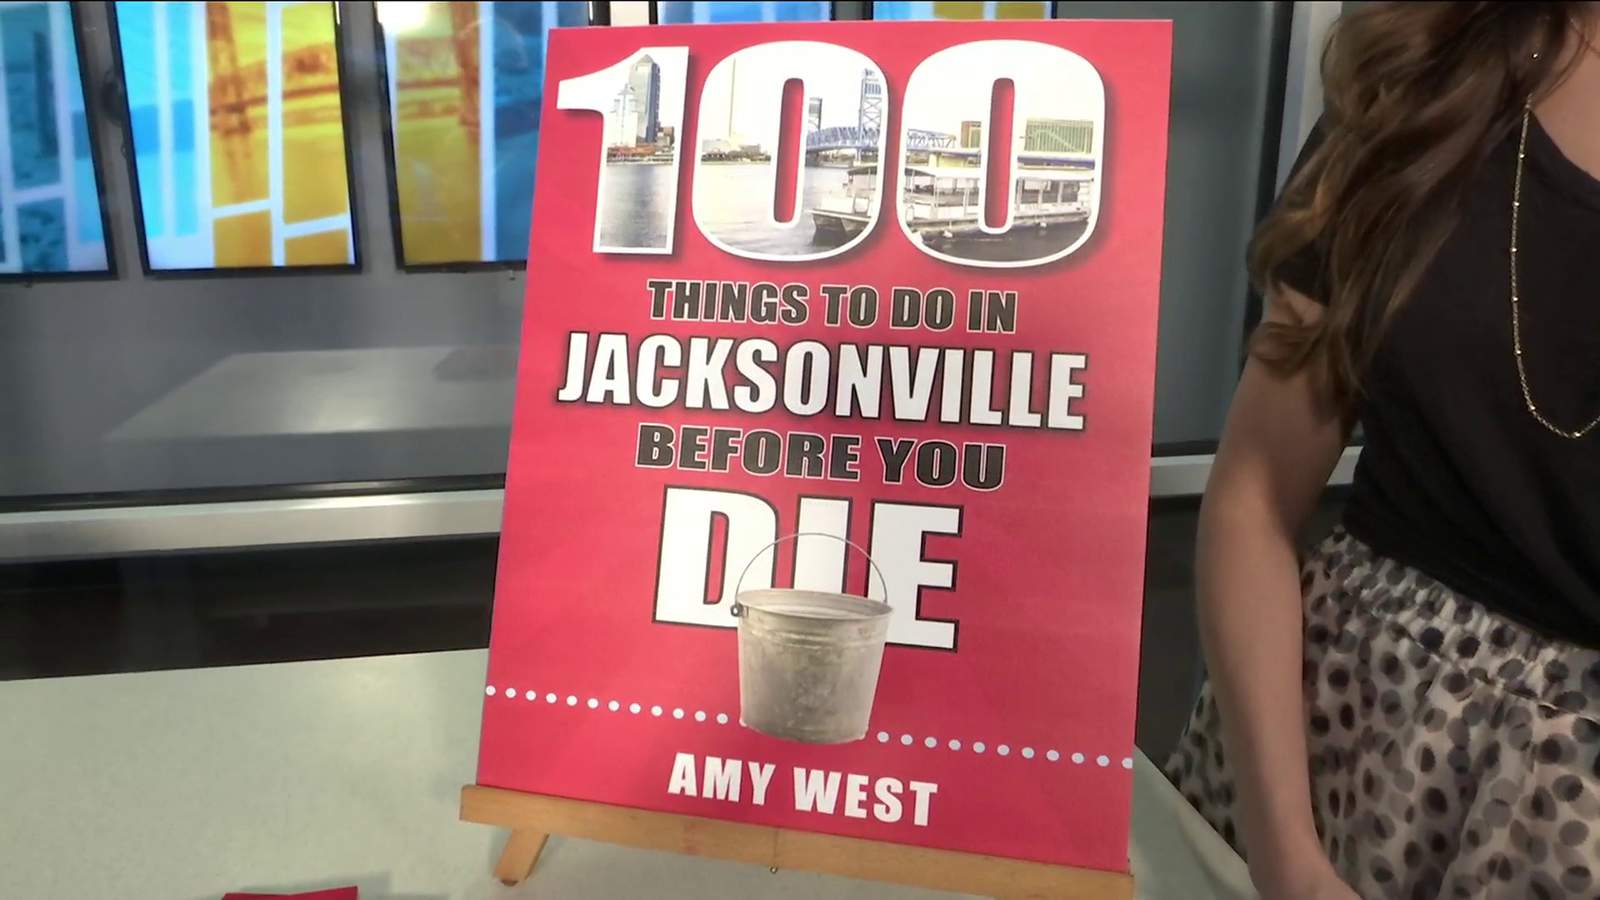 100 things to do in Jacksonville before you die